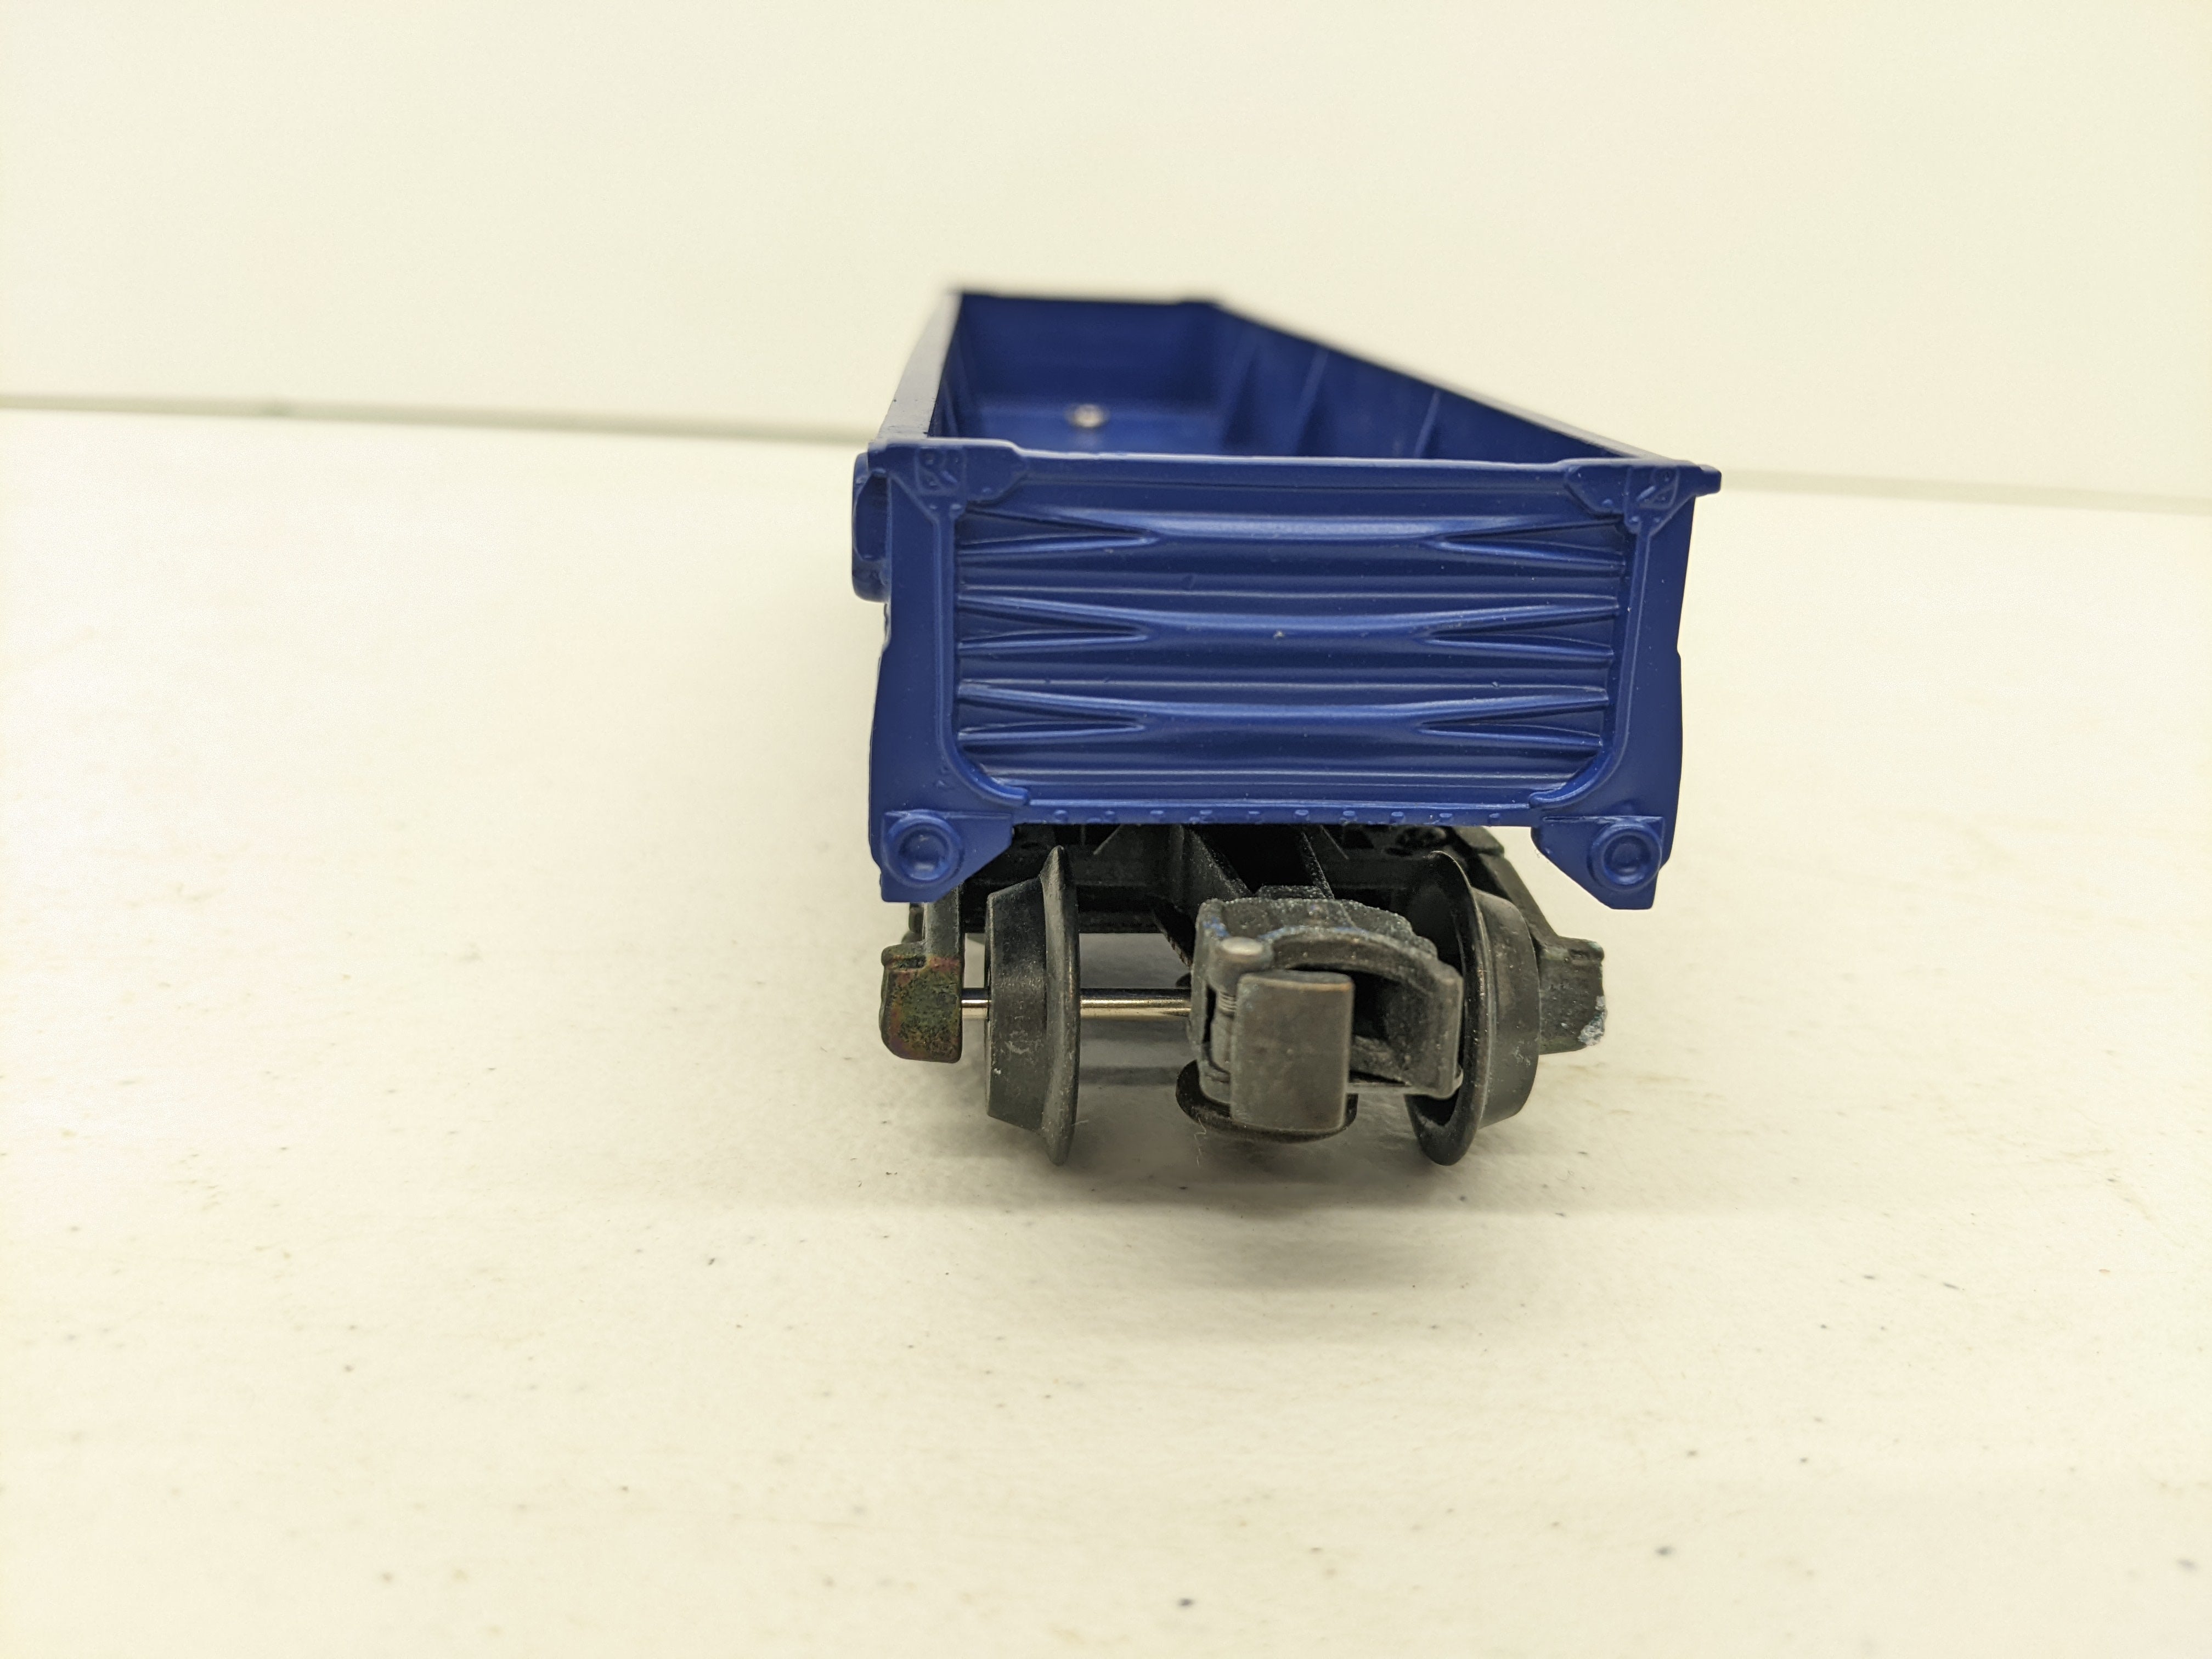 USED K-LINE O Scale, Gondola with 4 loads, Grand Trunk Western GTW #90005, Collectors Club Car 1994